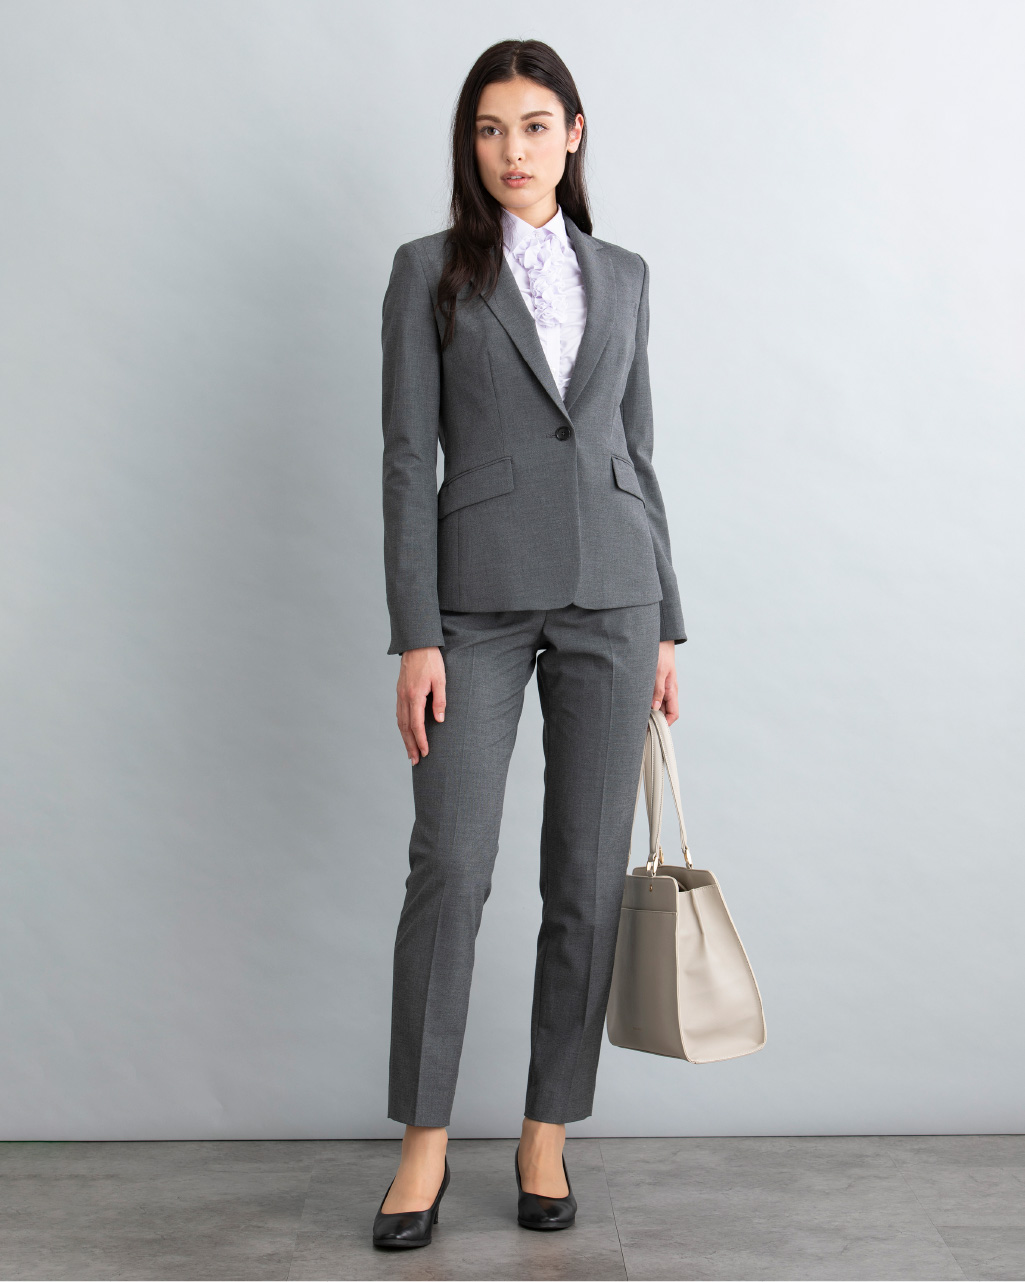 GRAY SUIT STYLE